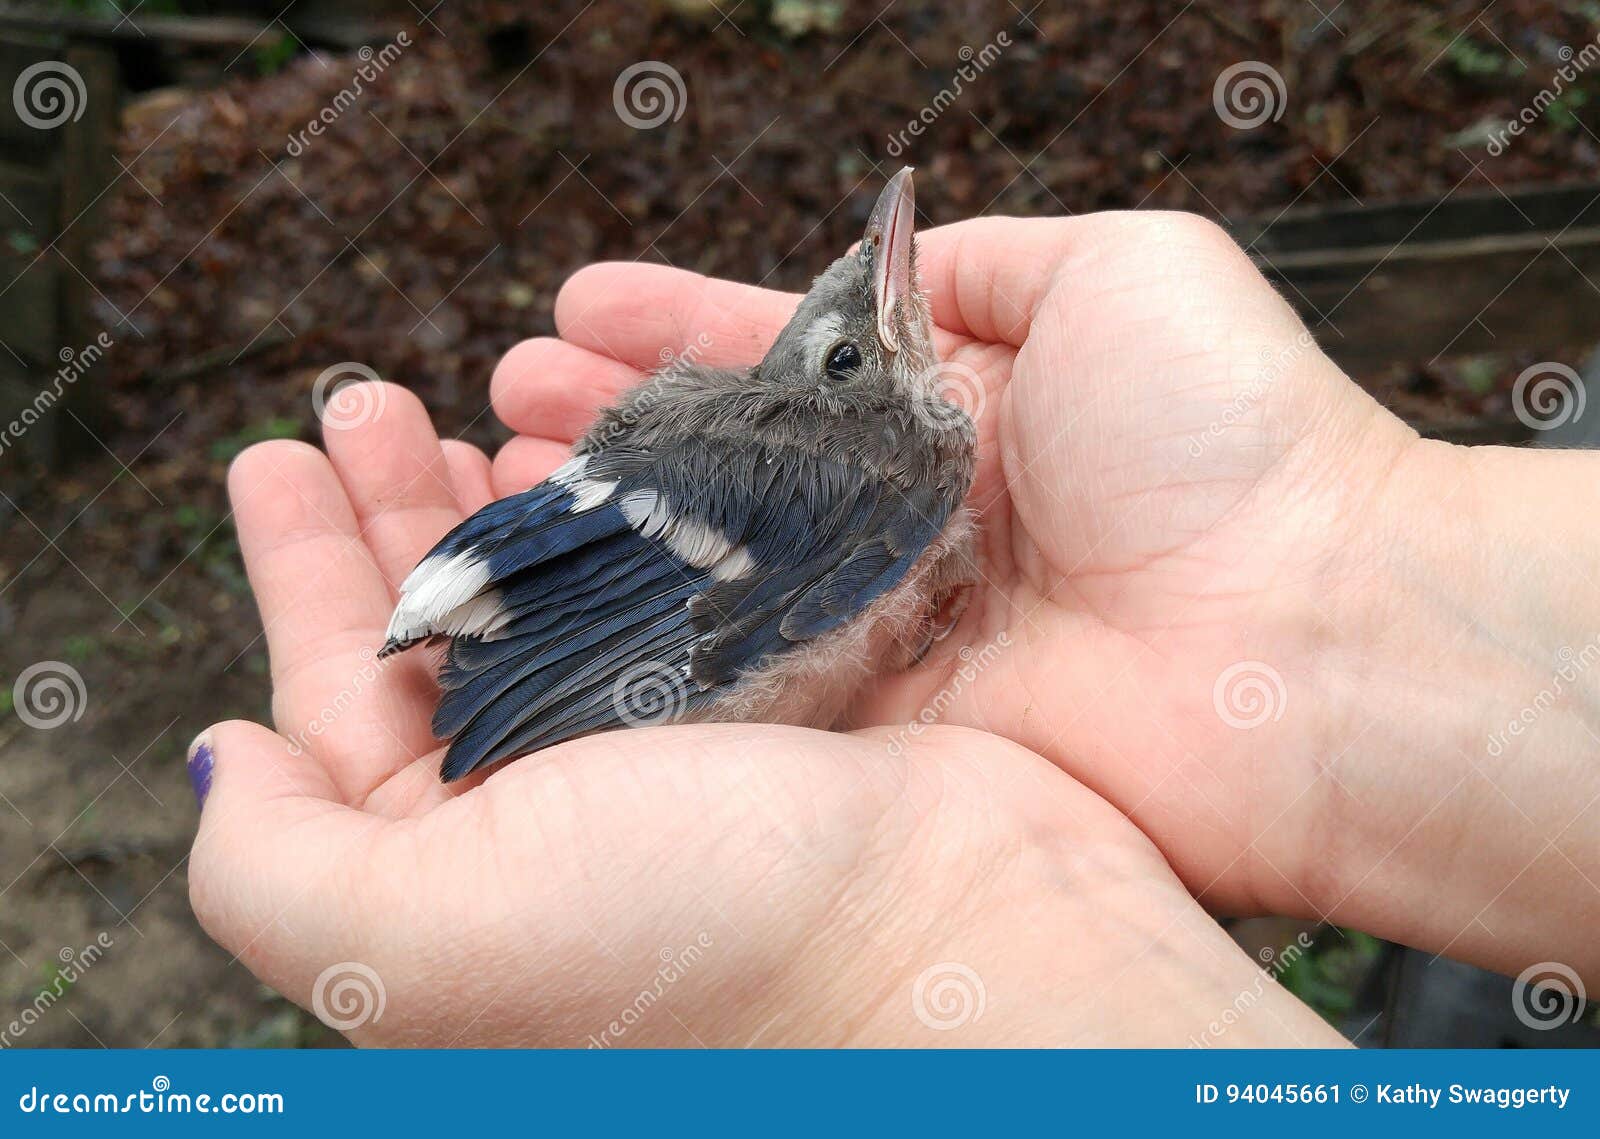 Baby Blue Jay Bird Stock Image Image Of Fell Mother